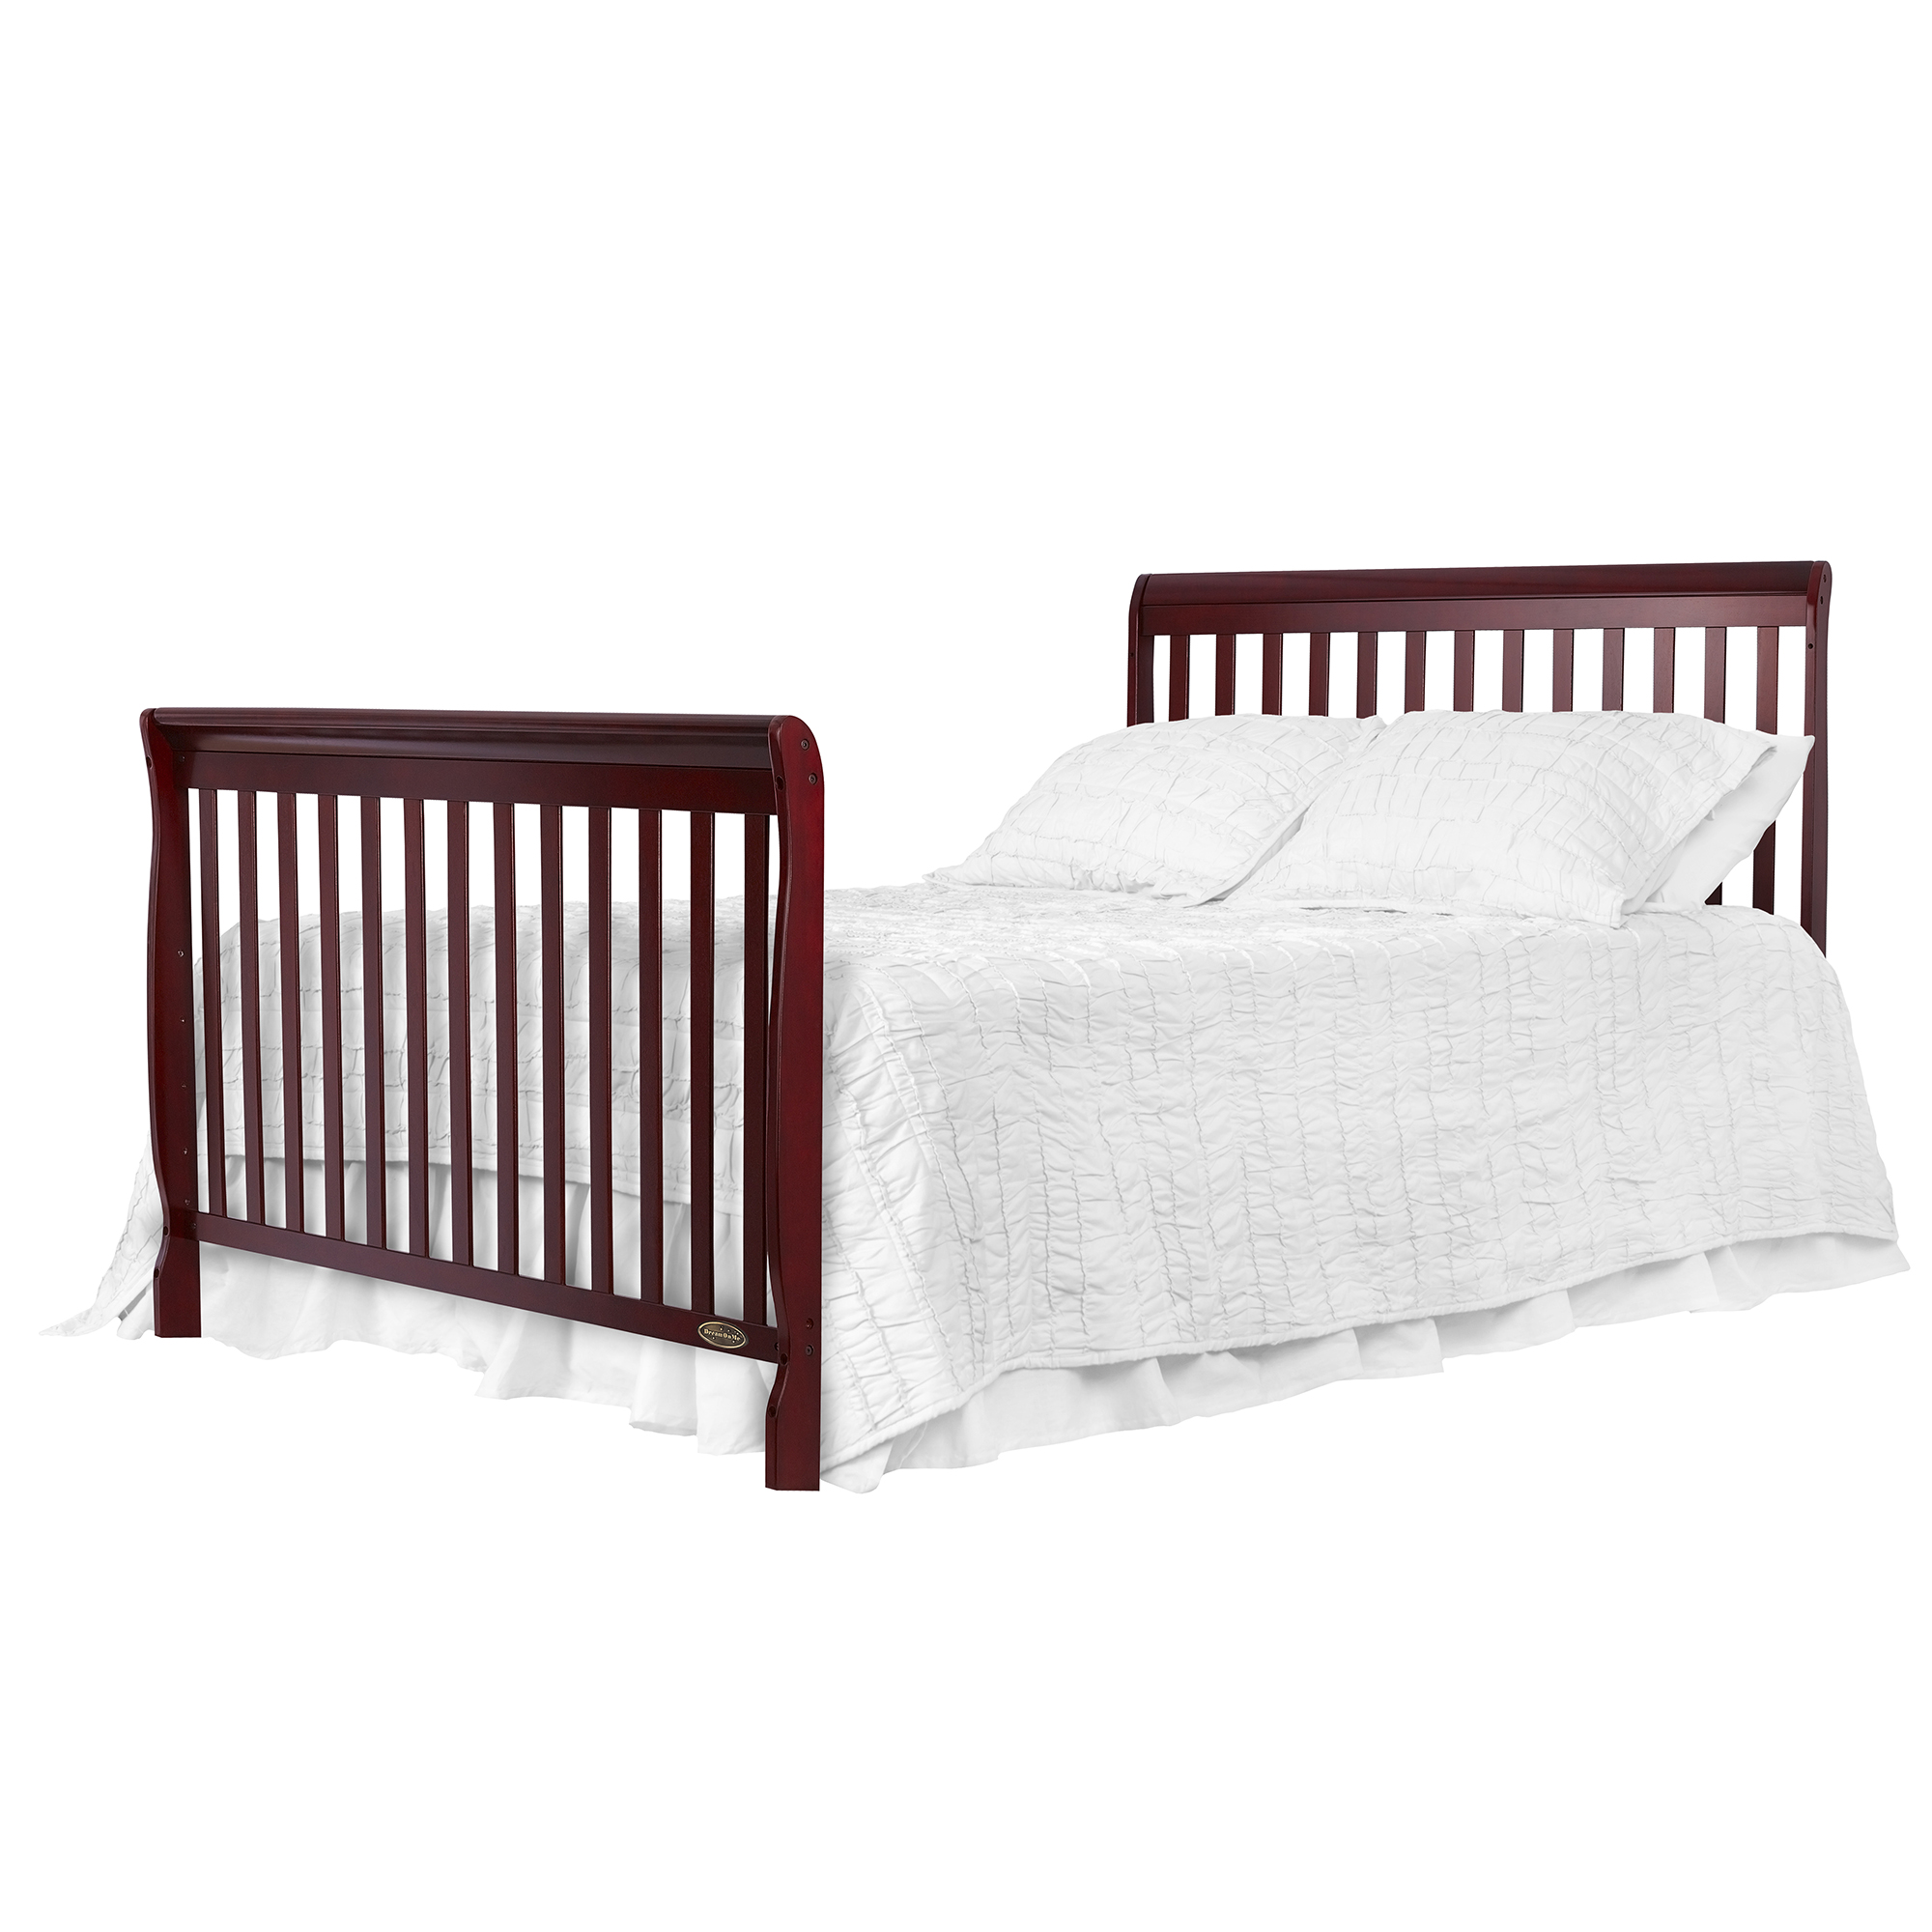 Dream On Me Ashton 5-in-1 Convertible Crib, Cherry, Greenguard Gold and JPMA Certified - image 3 of 15